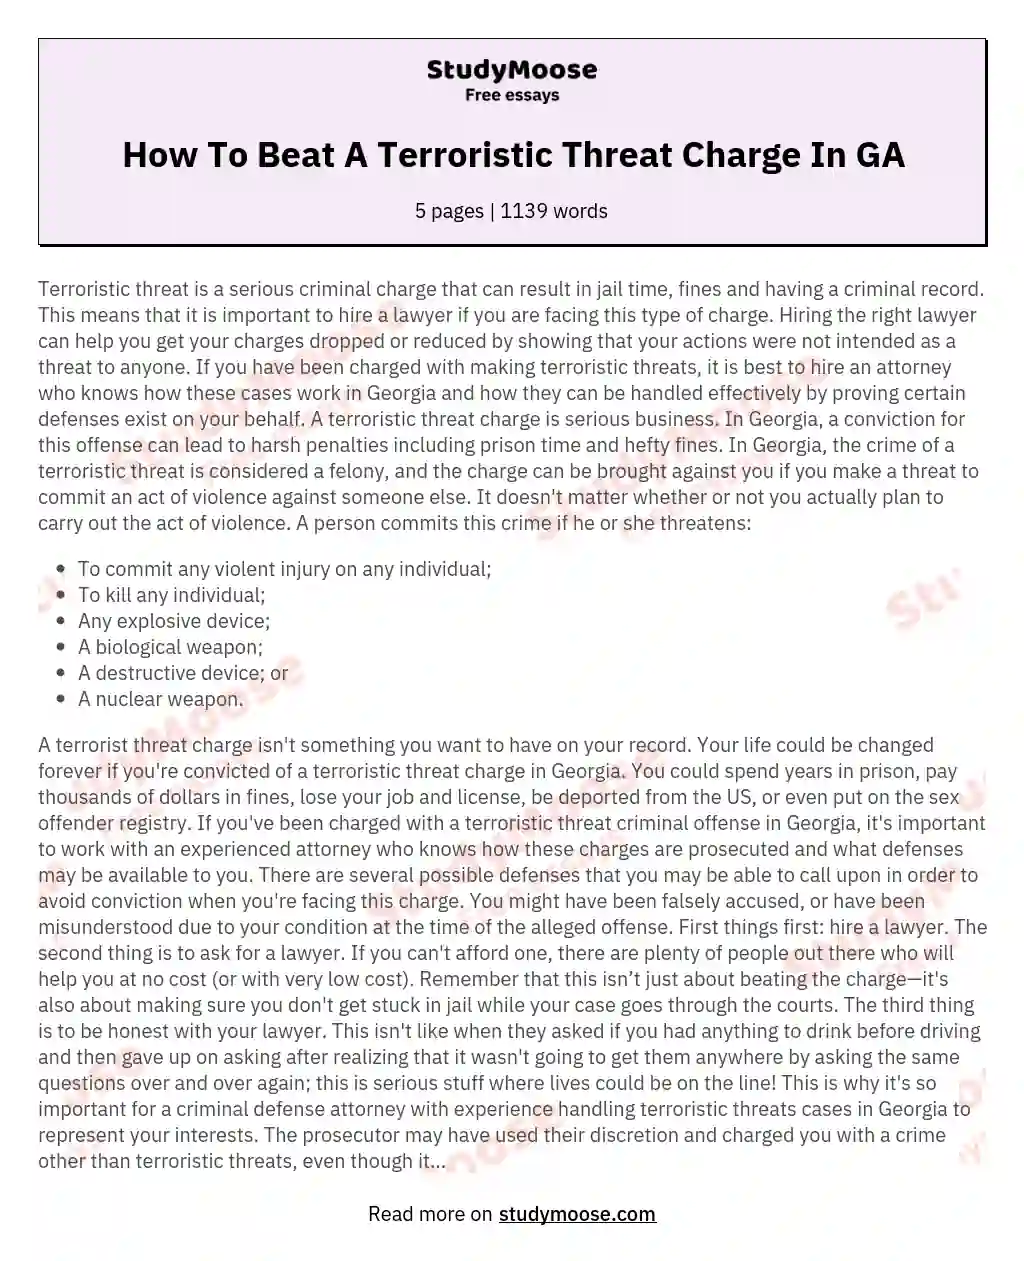 How To Beat A Terroristic Threat Charge In GA essay